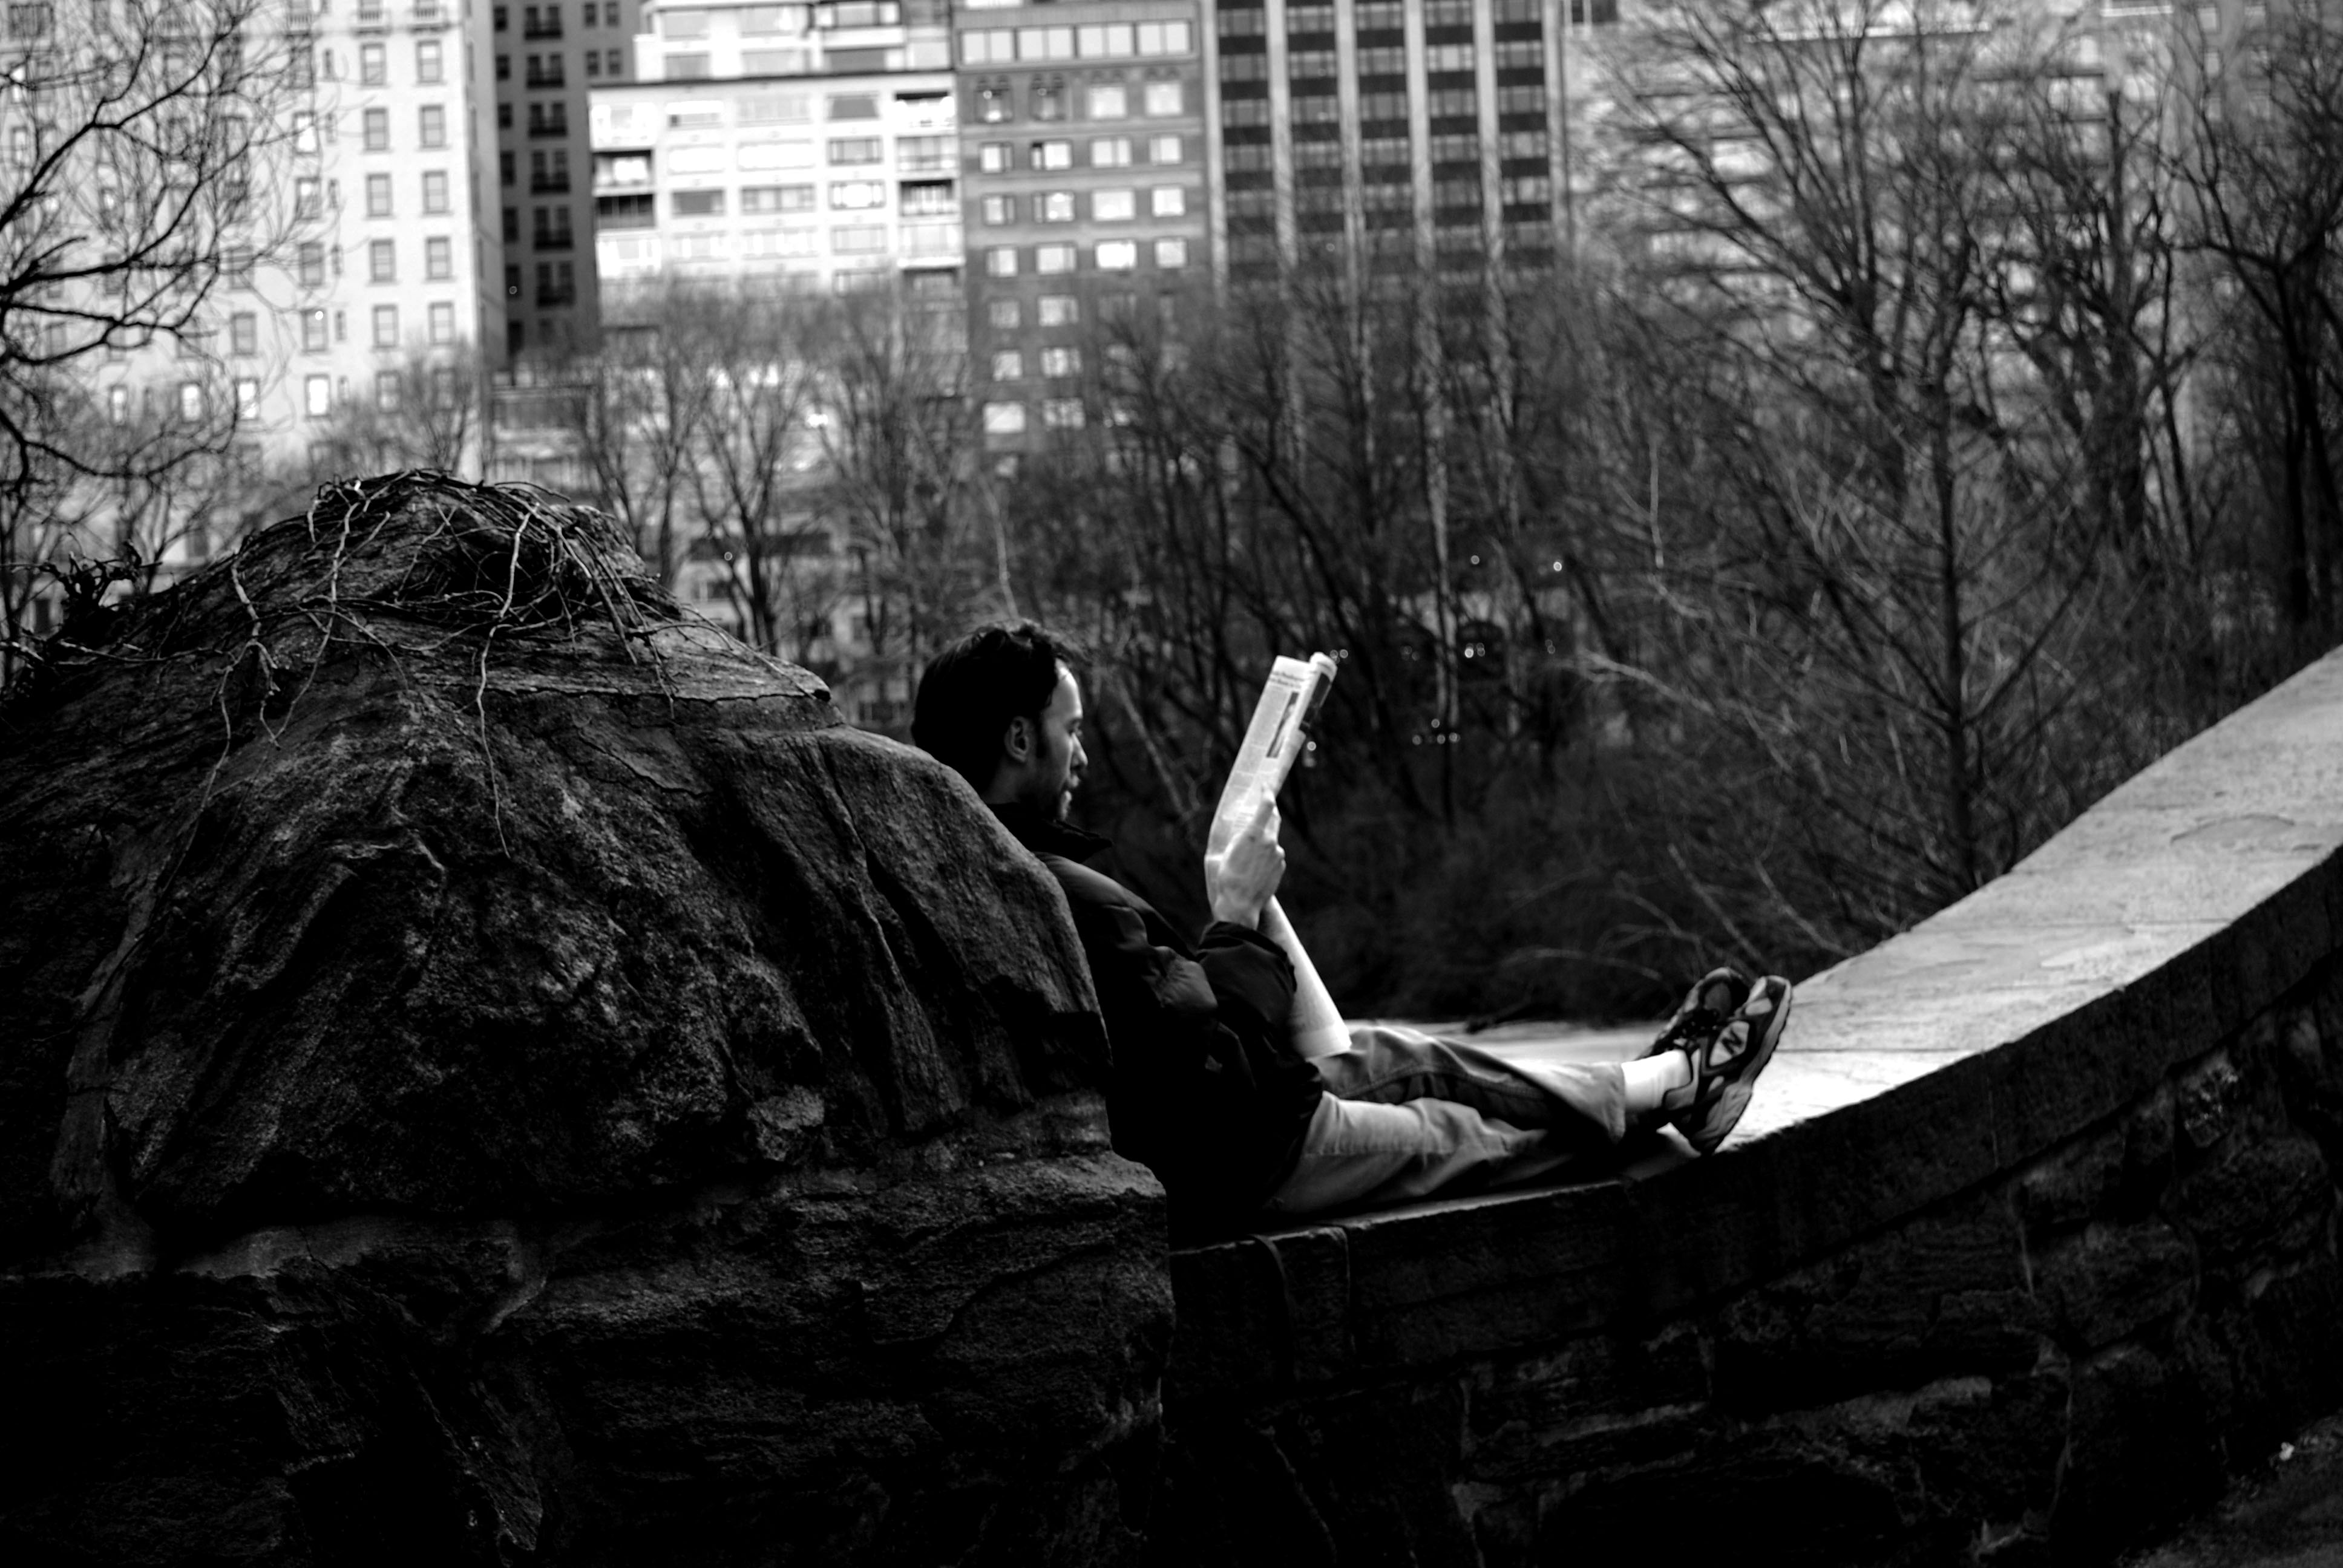 Walking around Central Park when I saw this man reading a book 